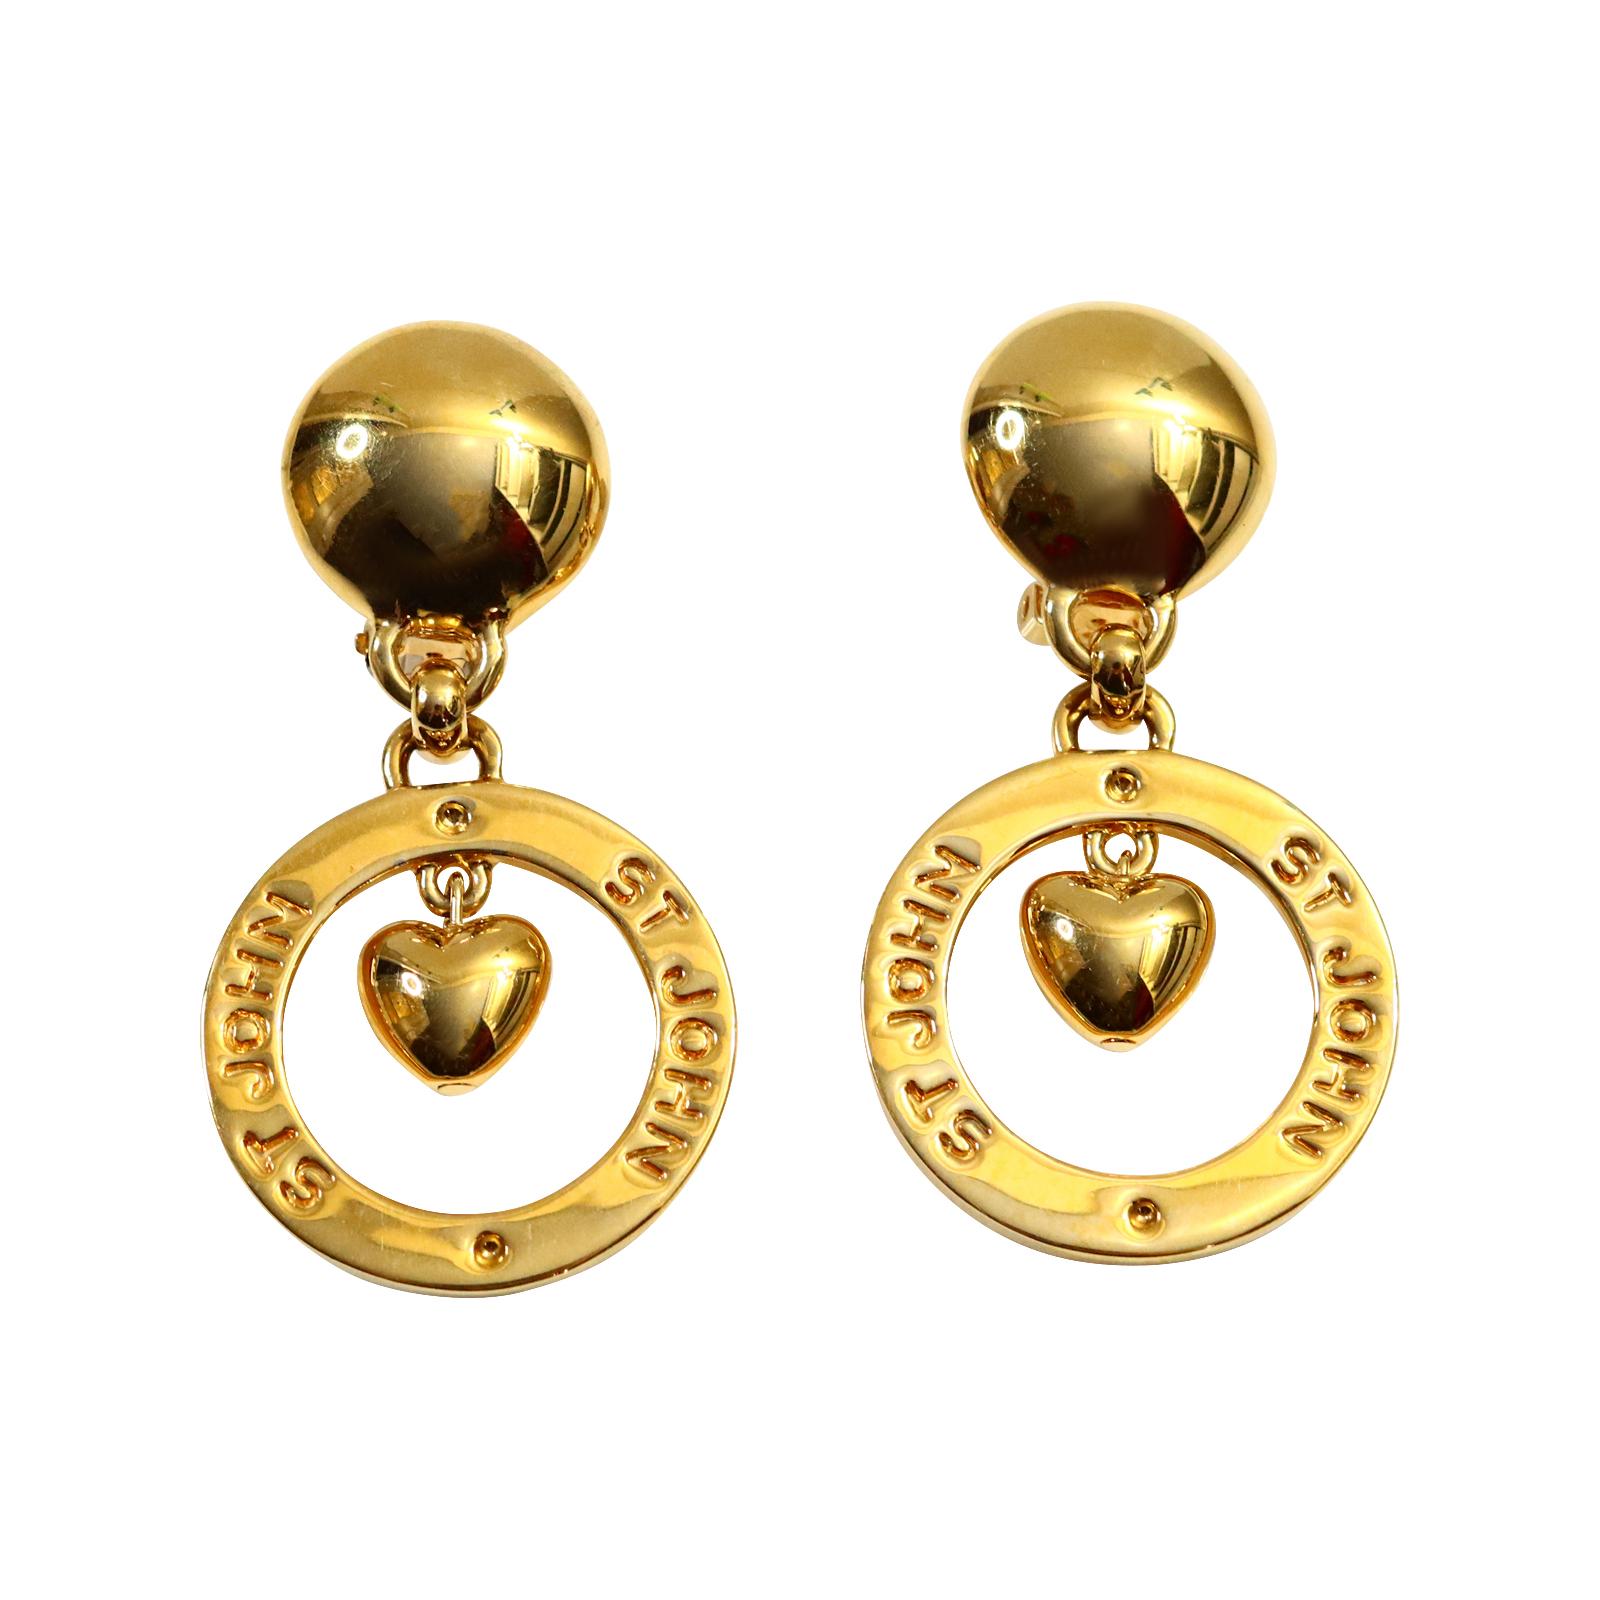 Vintage St John Gold dangling Heart Hoop Earrings Circa 1980s. St John made some great jewelry in the 1980s.  These dangling gold hearts look so chic and stunning with everything.  Substantial and well made. Clip On.

Again, these may have no curb